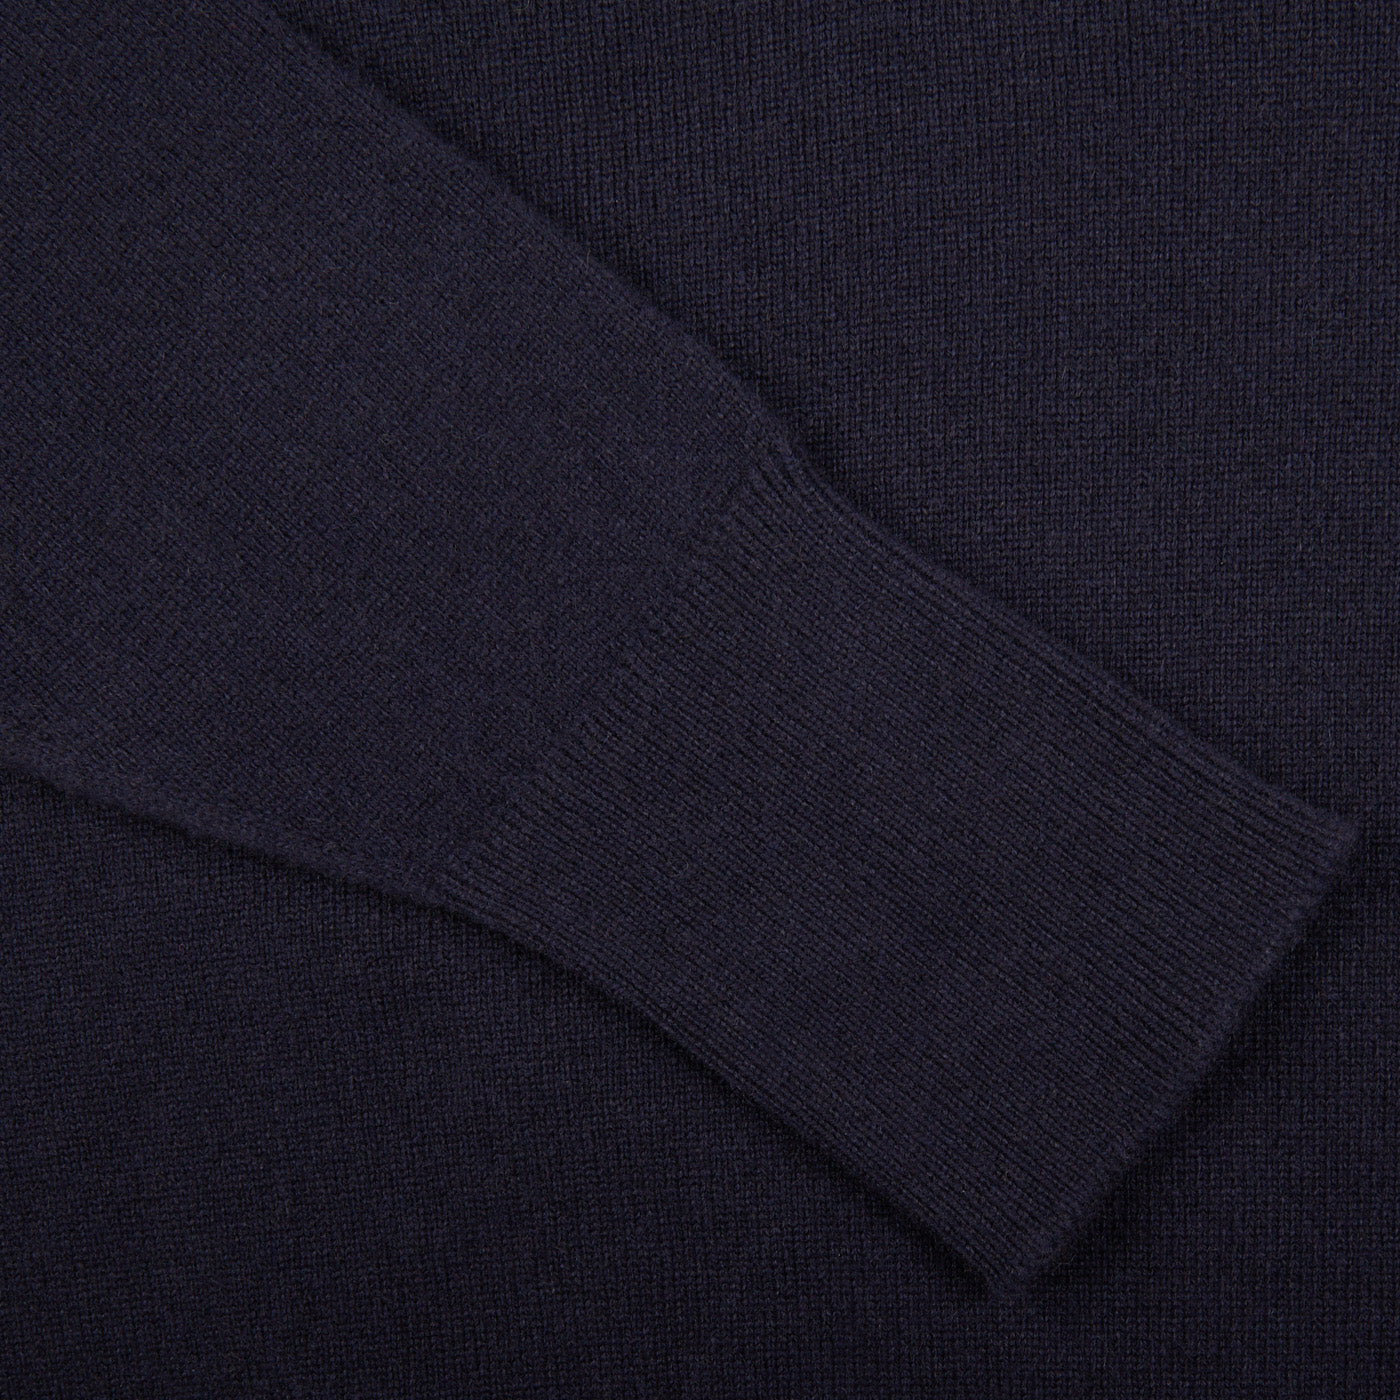 A close up of a Navy V-Neck Cashmere Sweater made with Scottish cashmere by William Lockie.